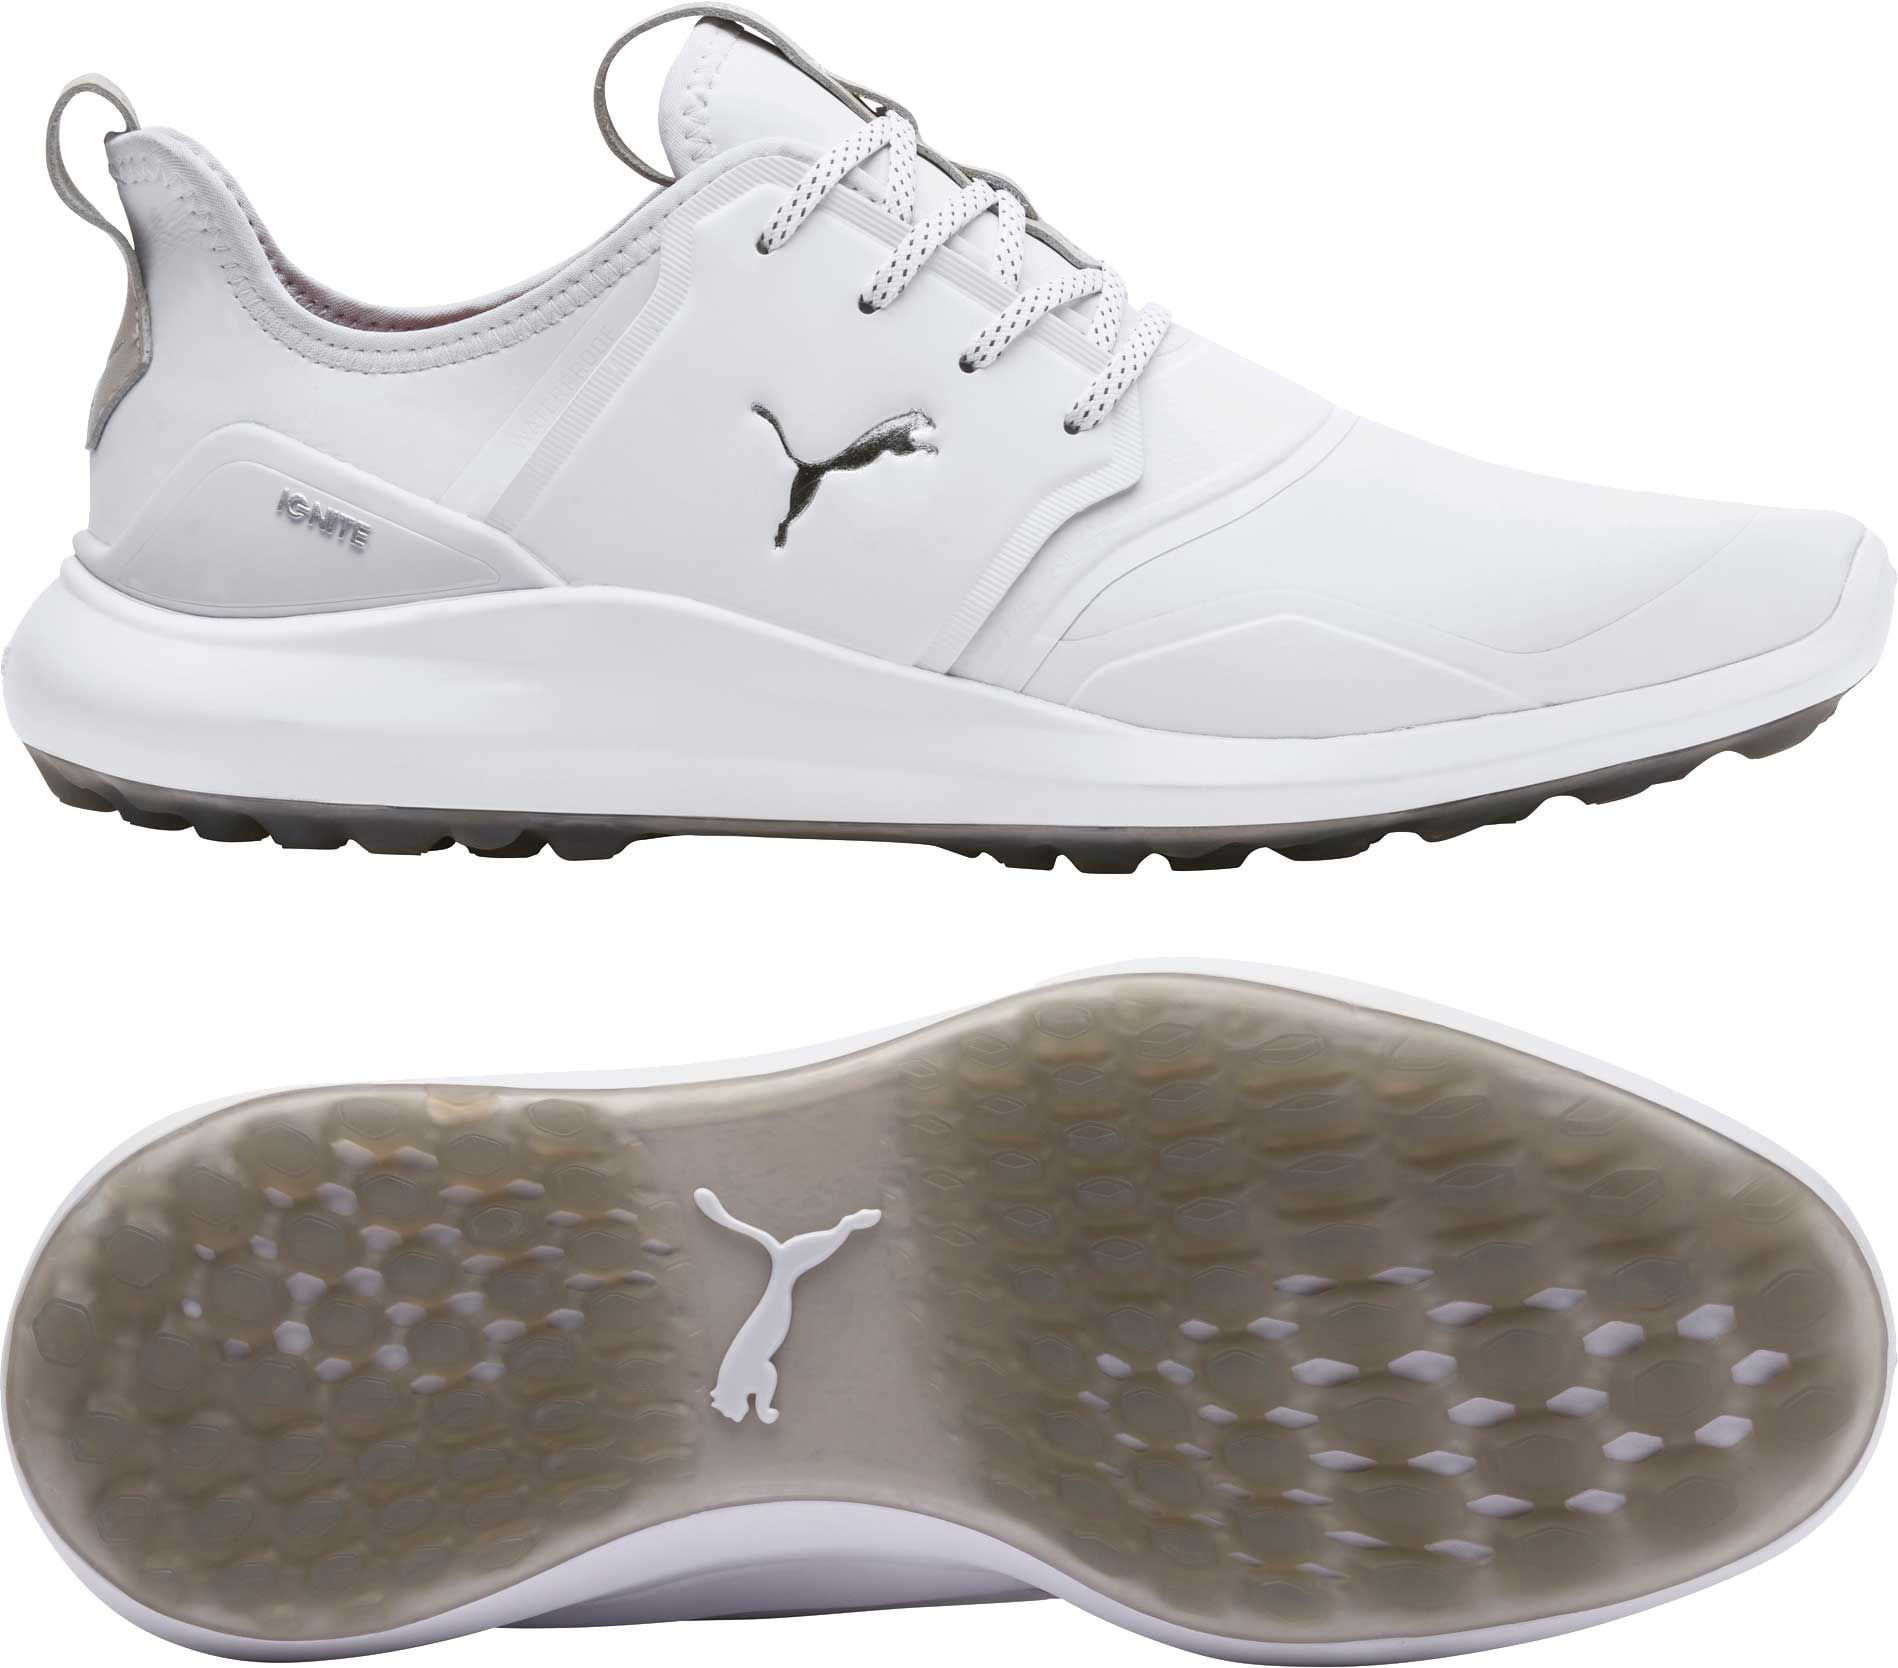 ignite nxt pro golf shoes